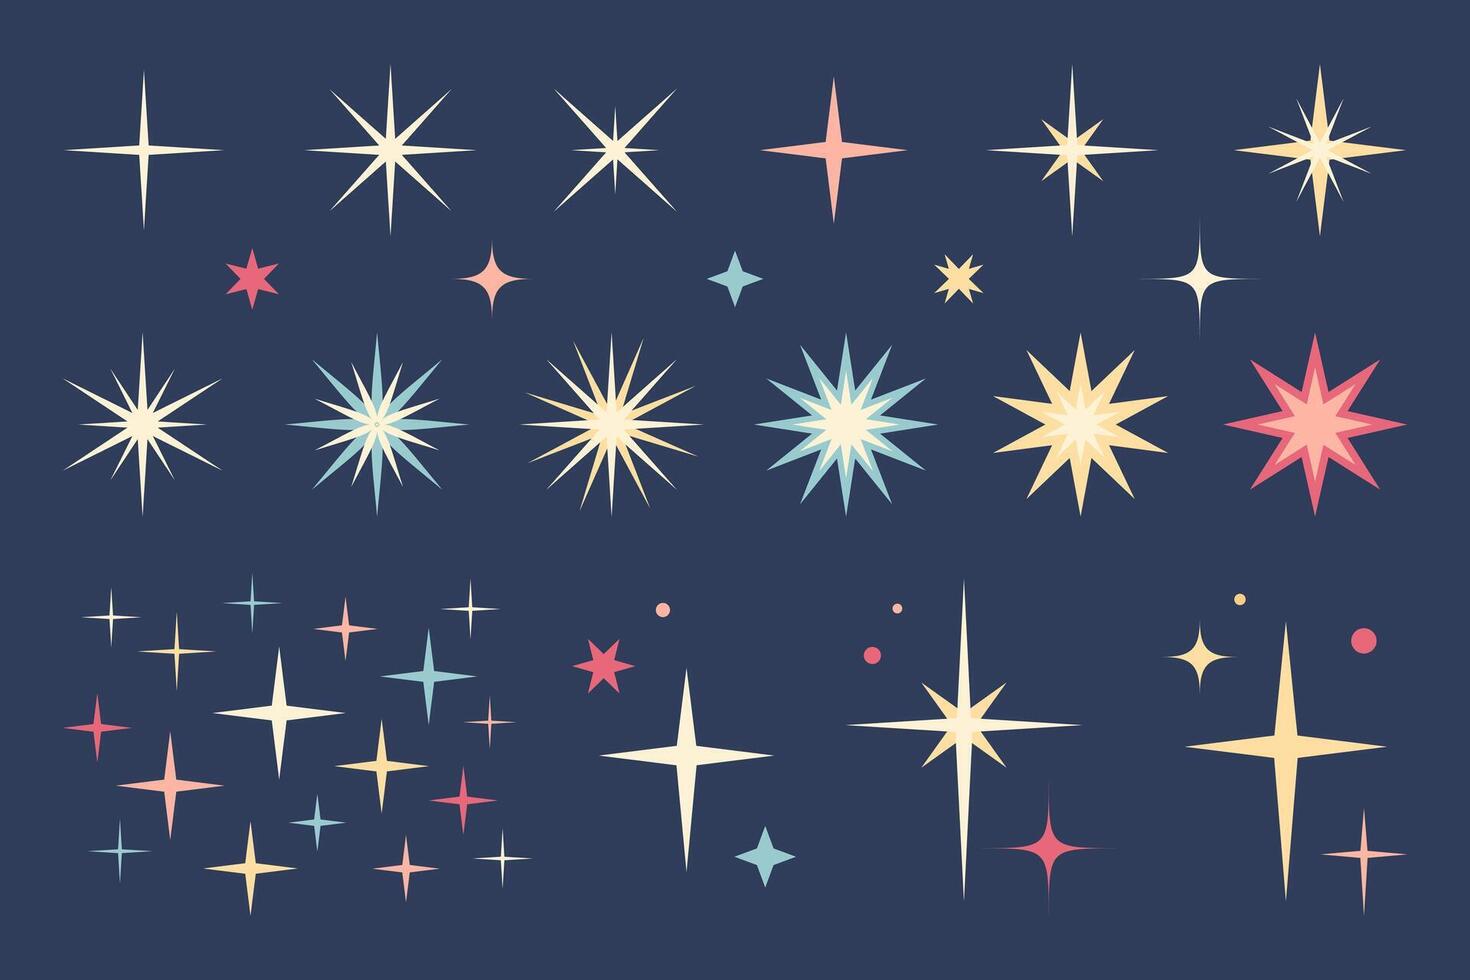 Color retro futuristic sparkle icons collection. Set of star shapes on dark blue background vector